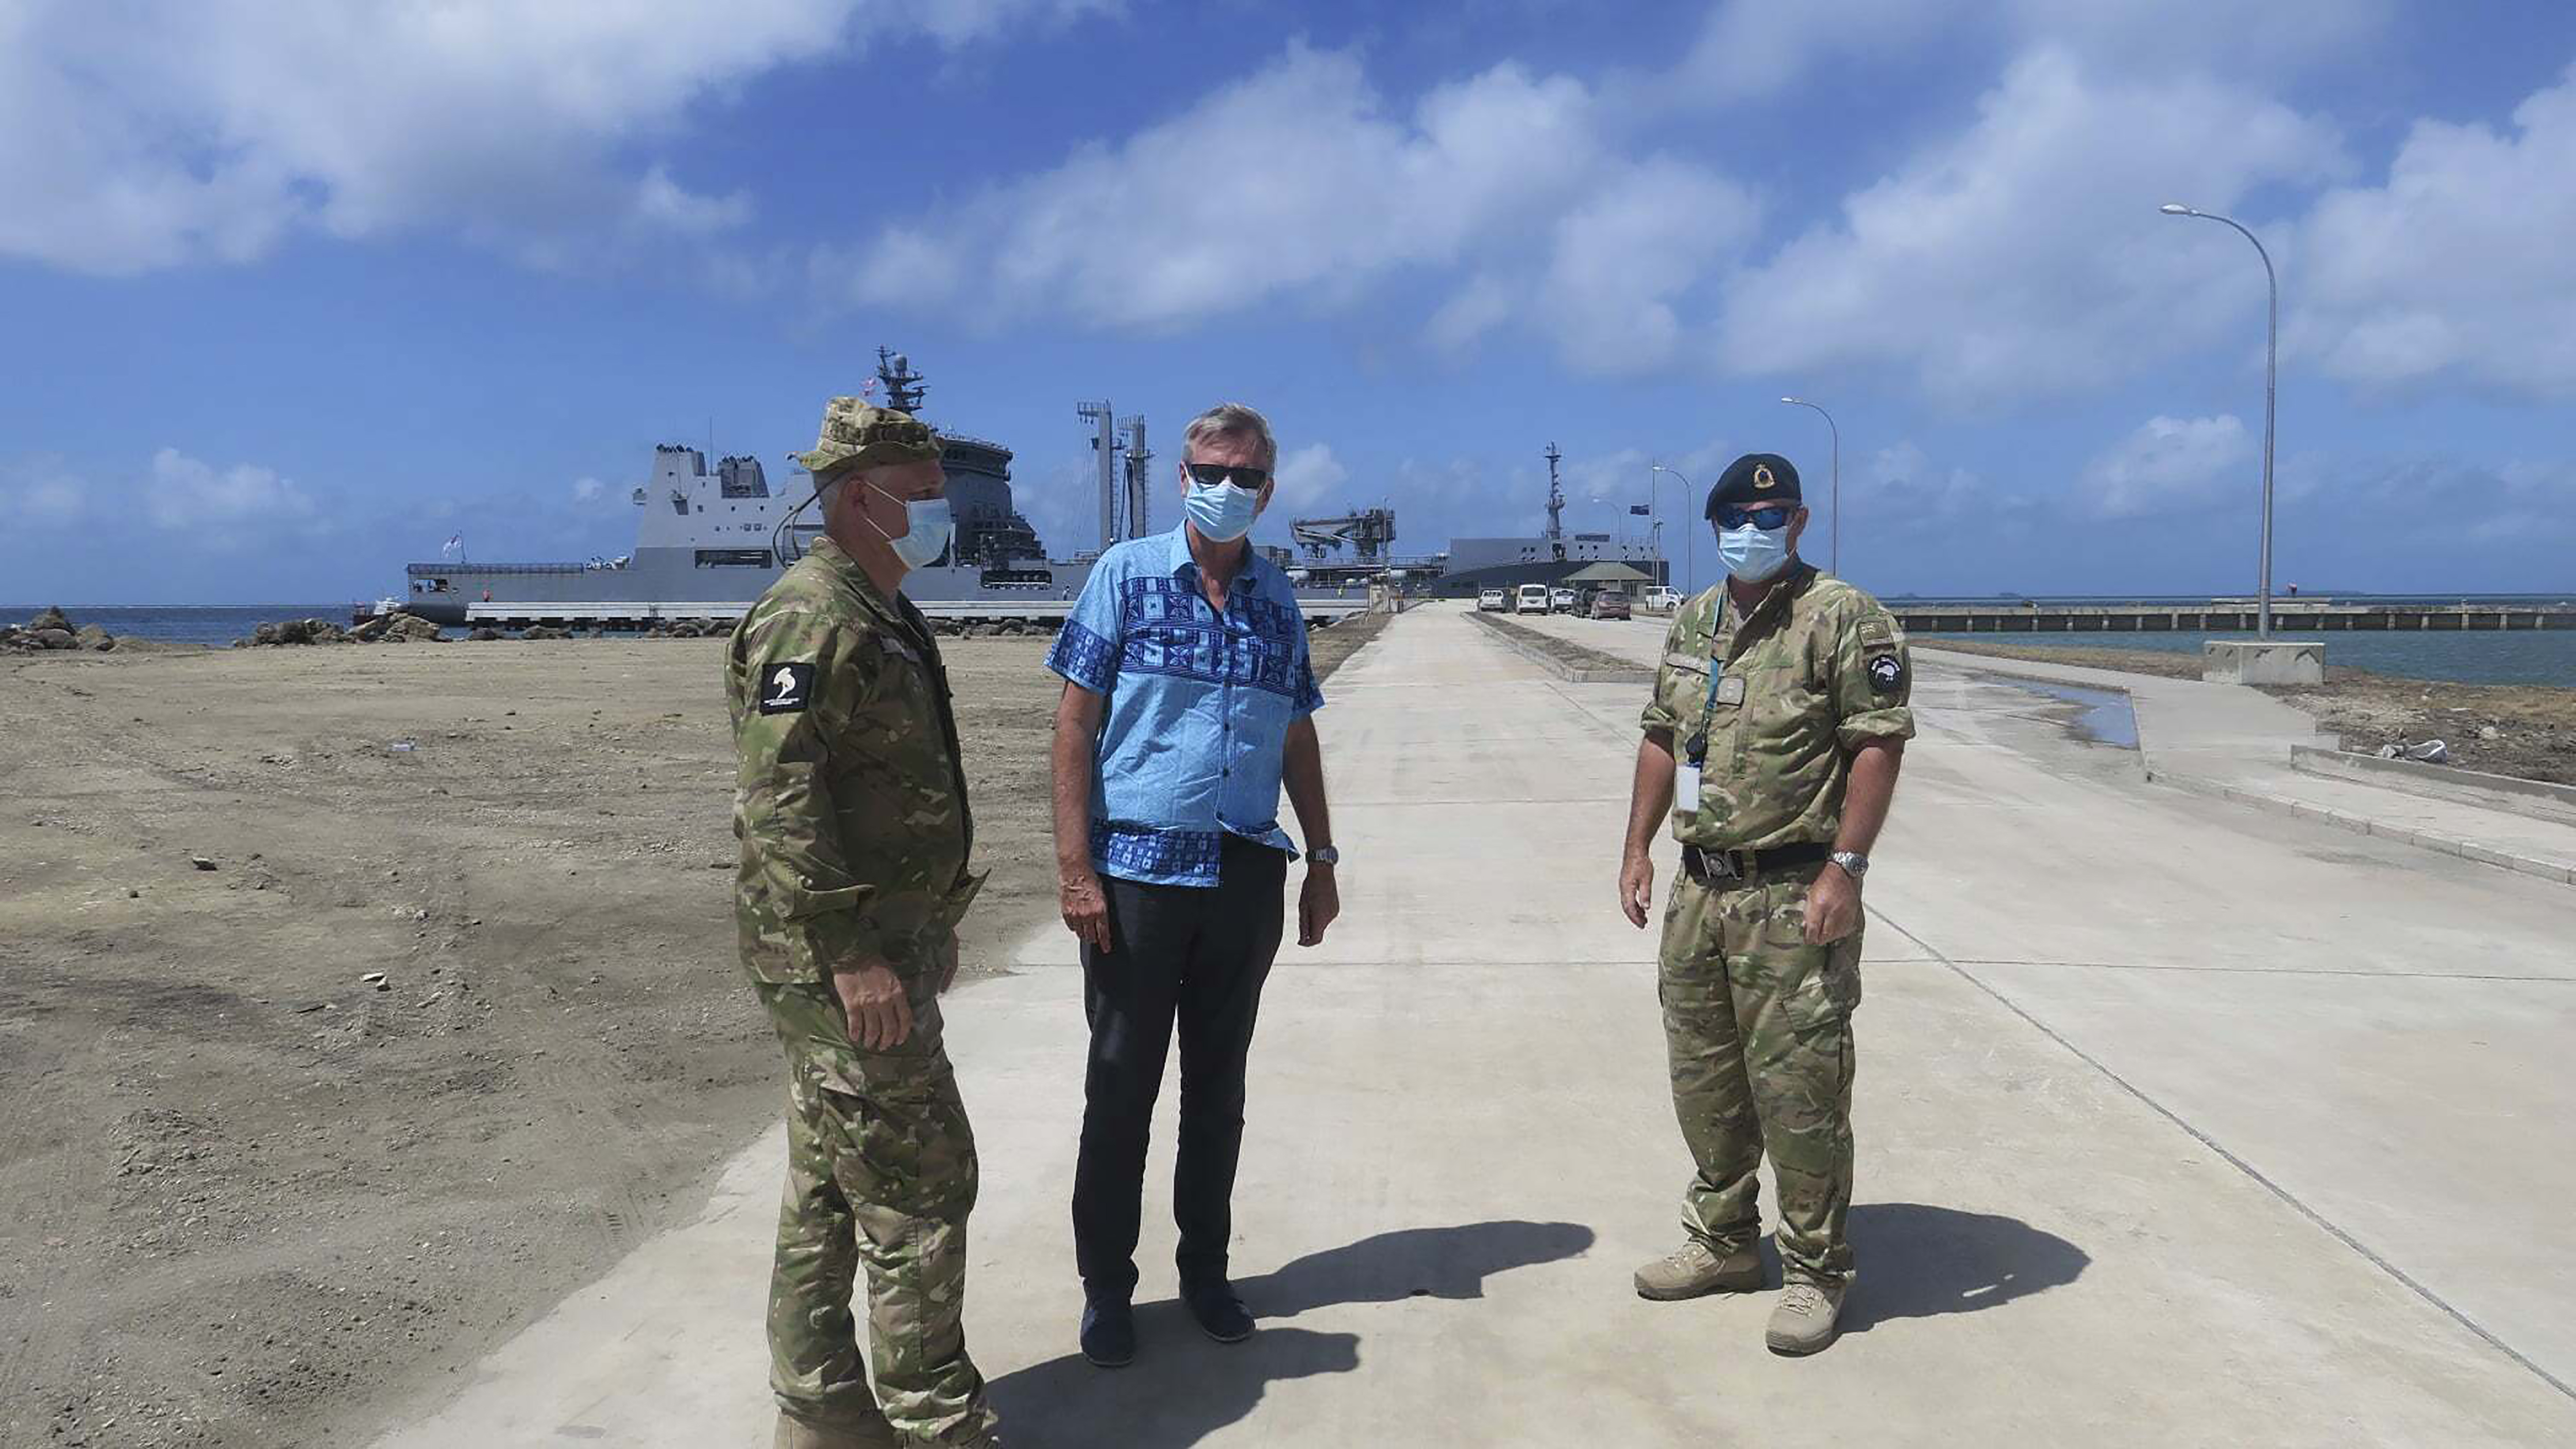 Peter Lund stands with military personnel at a wharf in Tonga 